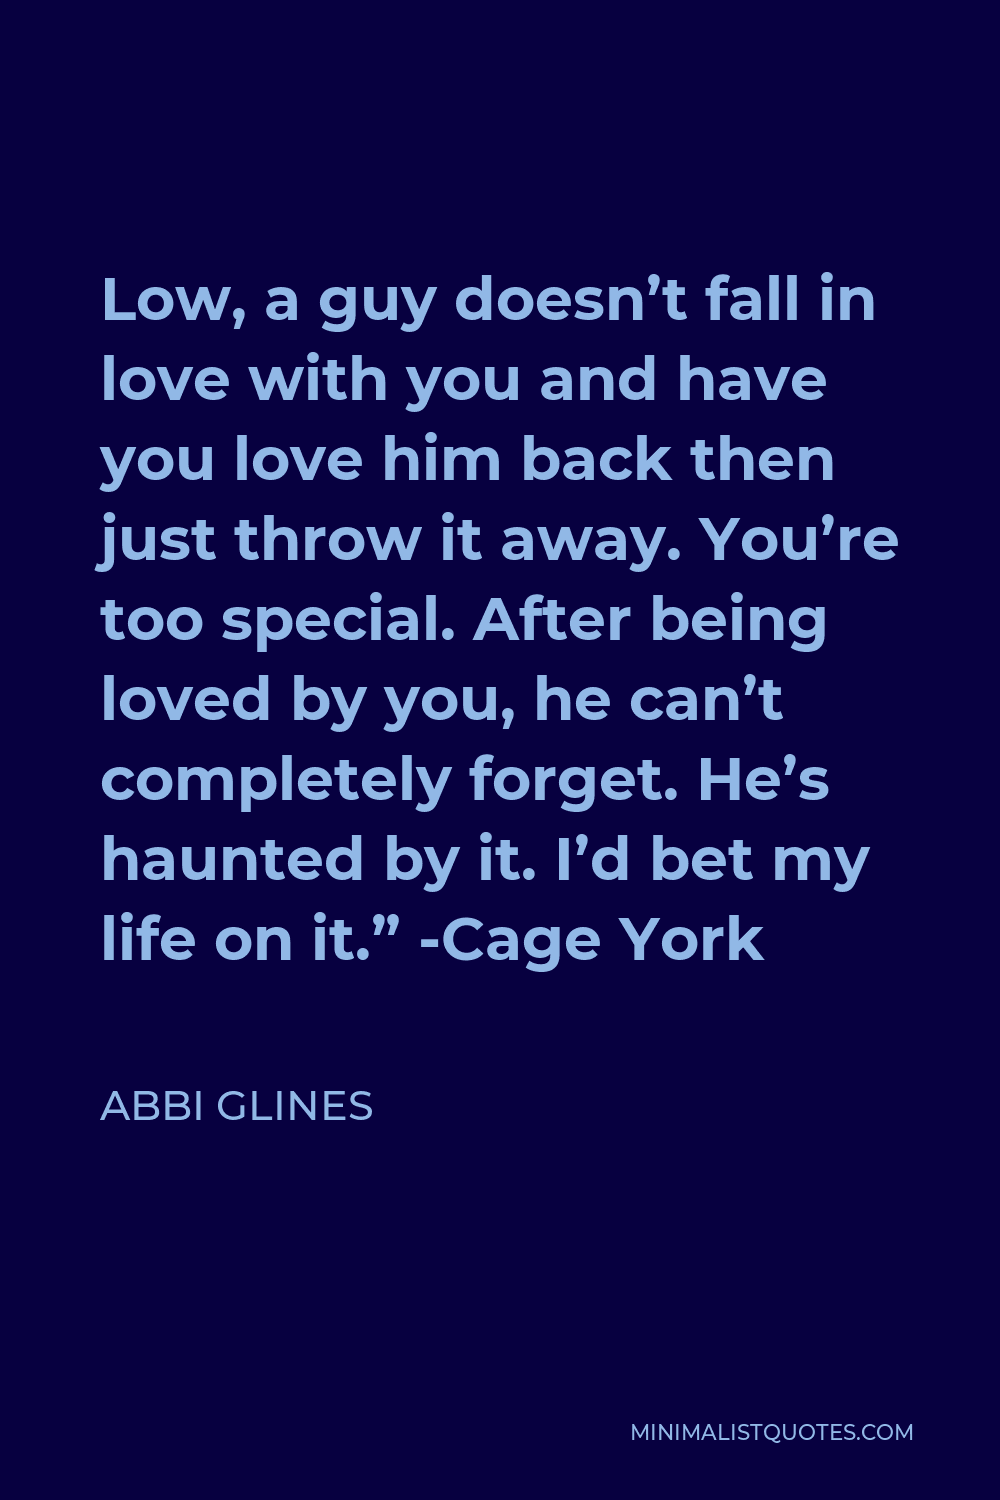 Abbi Glines Quote - Low, a guy doesn’t fall in love with you and have you love him back then just throw it away. You’re too special. After being loved by you, he can’t completely forget. He’s haunted by it. I’d bet my life on it.” -Cage York